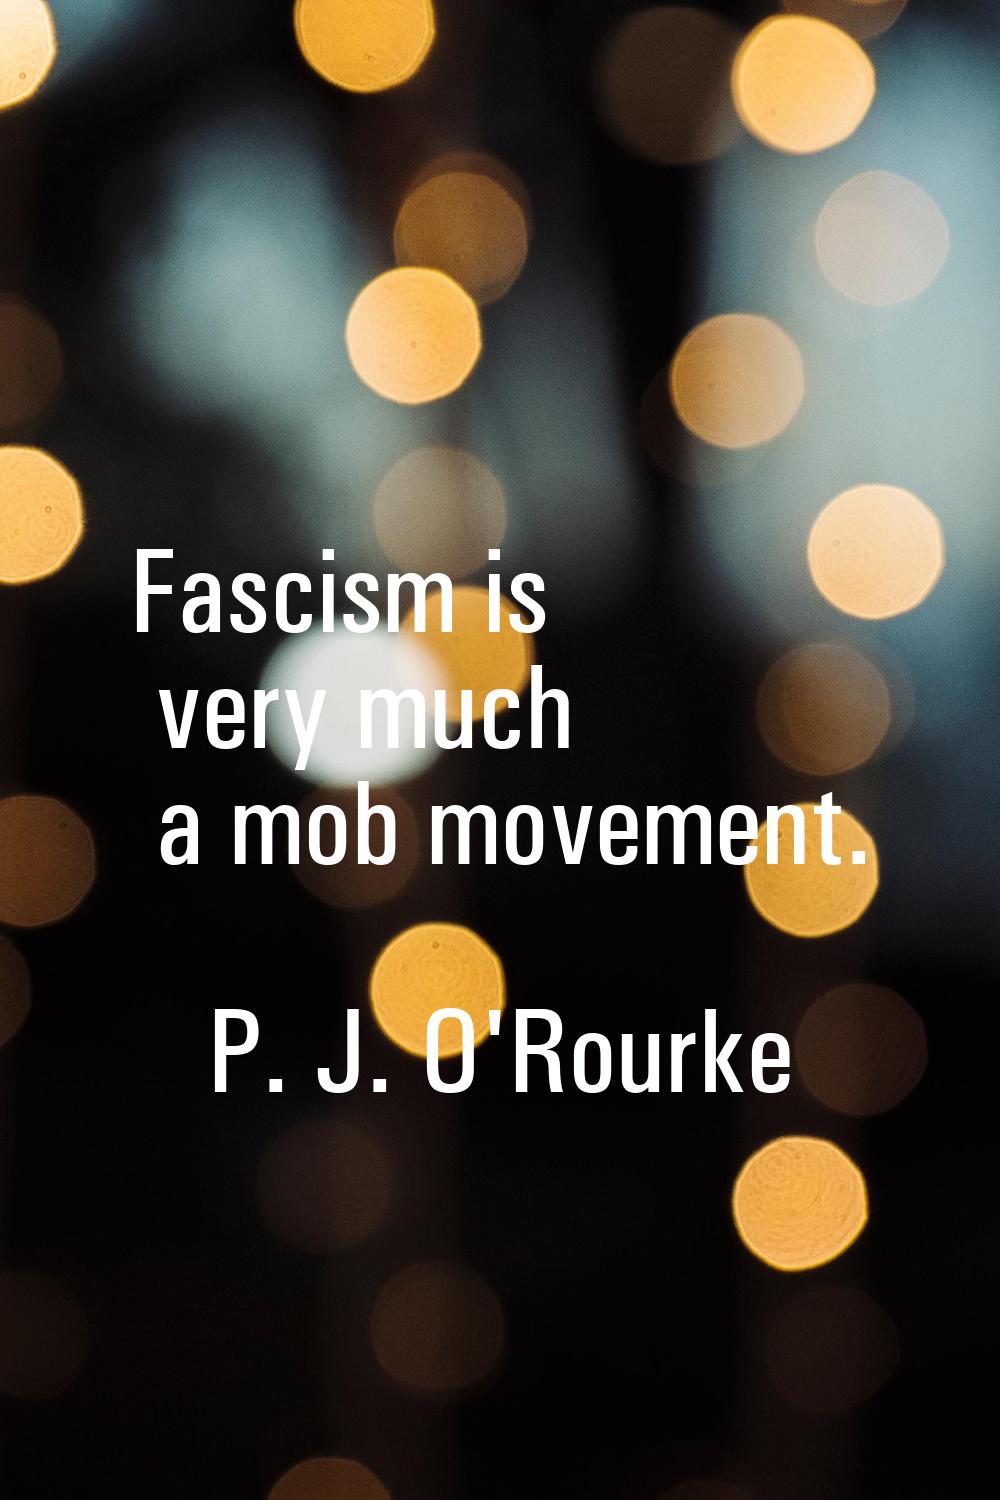 Fascism is very much a mob movement.